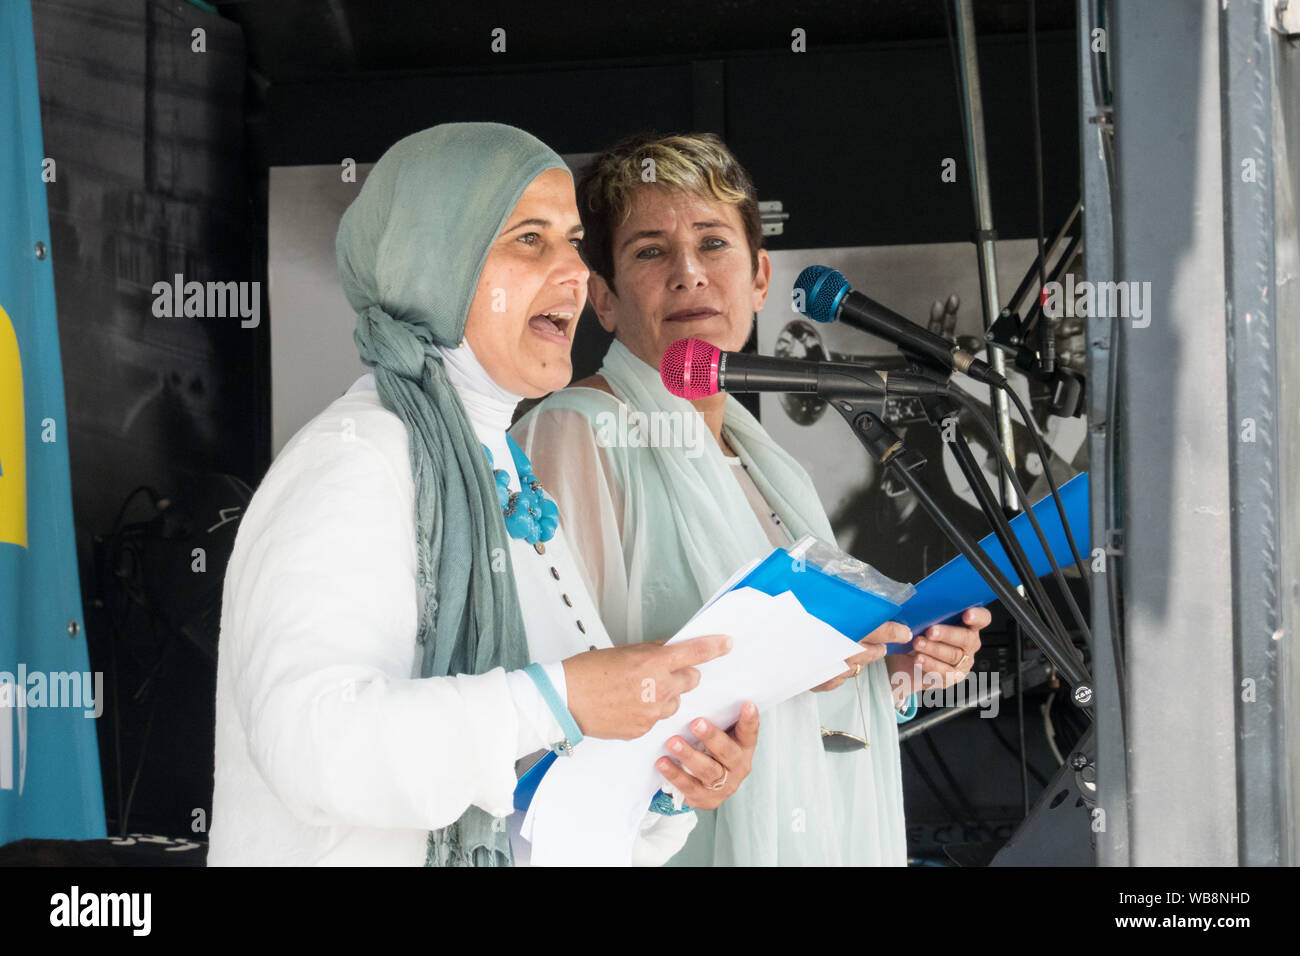 Jerusalem, Israel. 25th August, 2019. Women Wage Peace kick start their 4 day 'Journey of Hope' with an event at the Wohl Rose Garden opposite the Knesset ahead of the second round of 2019 national elections scheduled for 19th September, 2019. Assembling from all over the country, both Jewish and Arab women, they voice their demand from government for a political agreement with the country's adversaries and urge everyone to vote without concessions on equality, security and peace. Credit: Nir Alon/Alamy Live News. Stock Photo